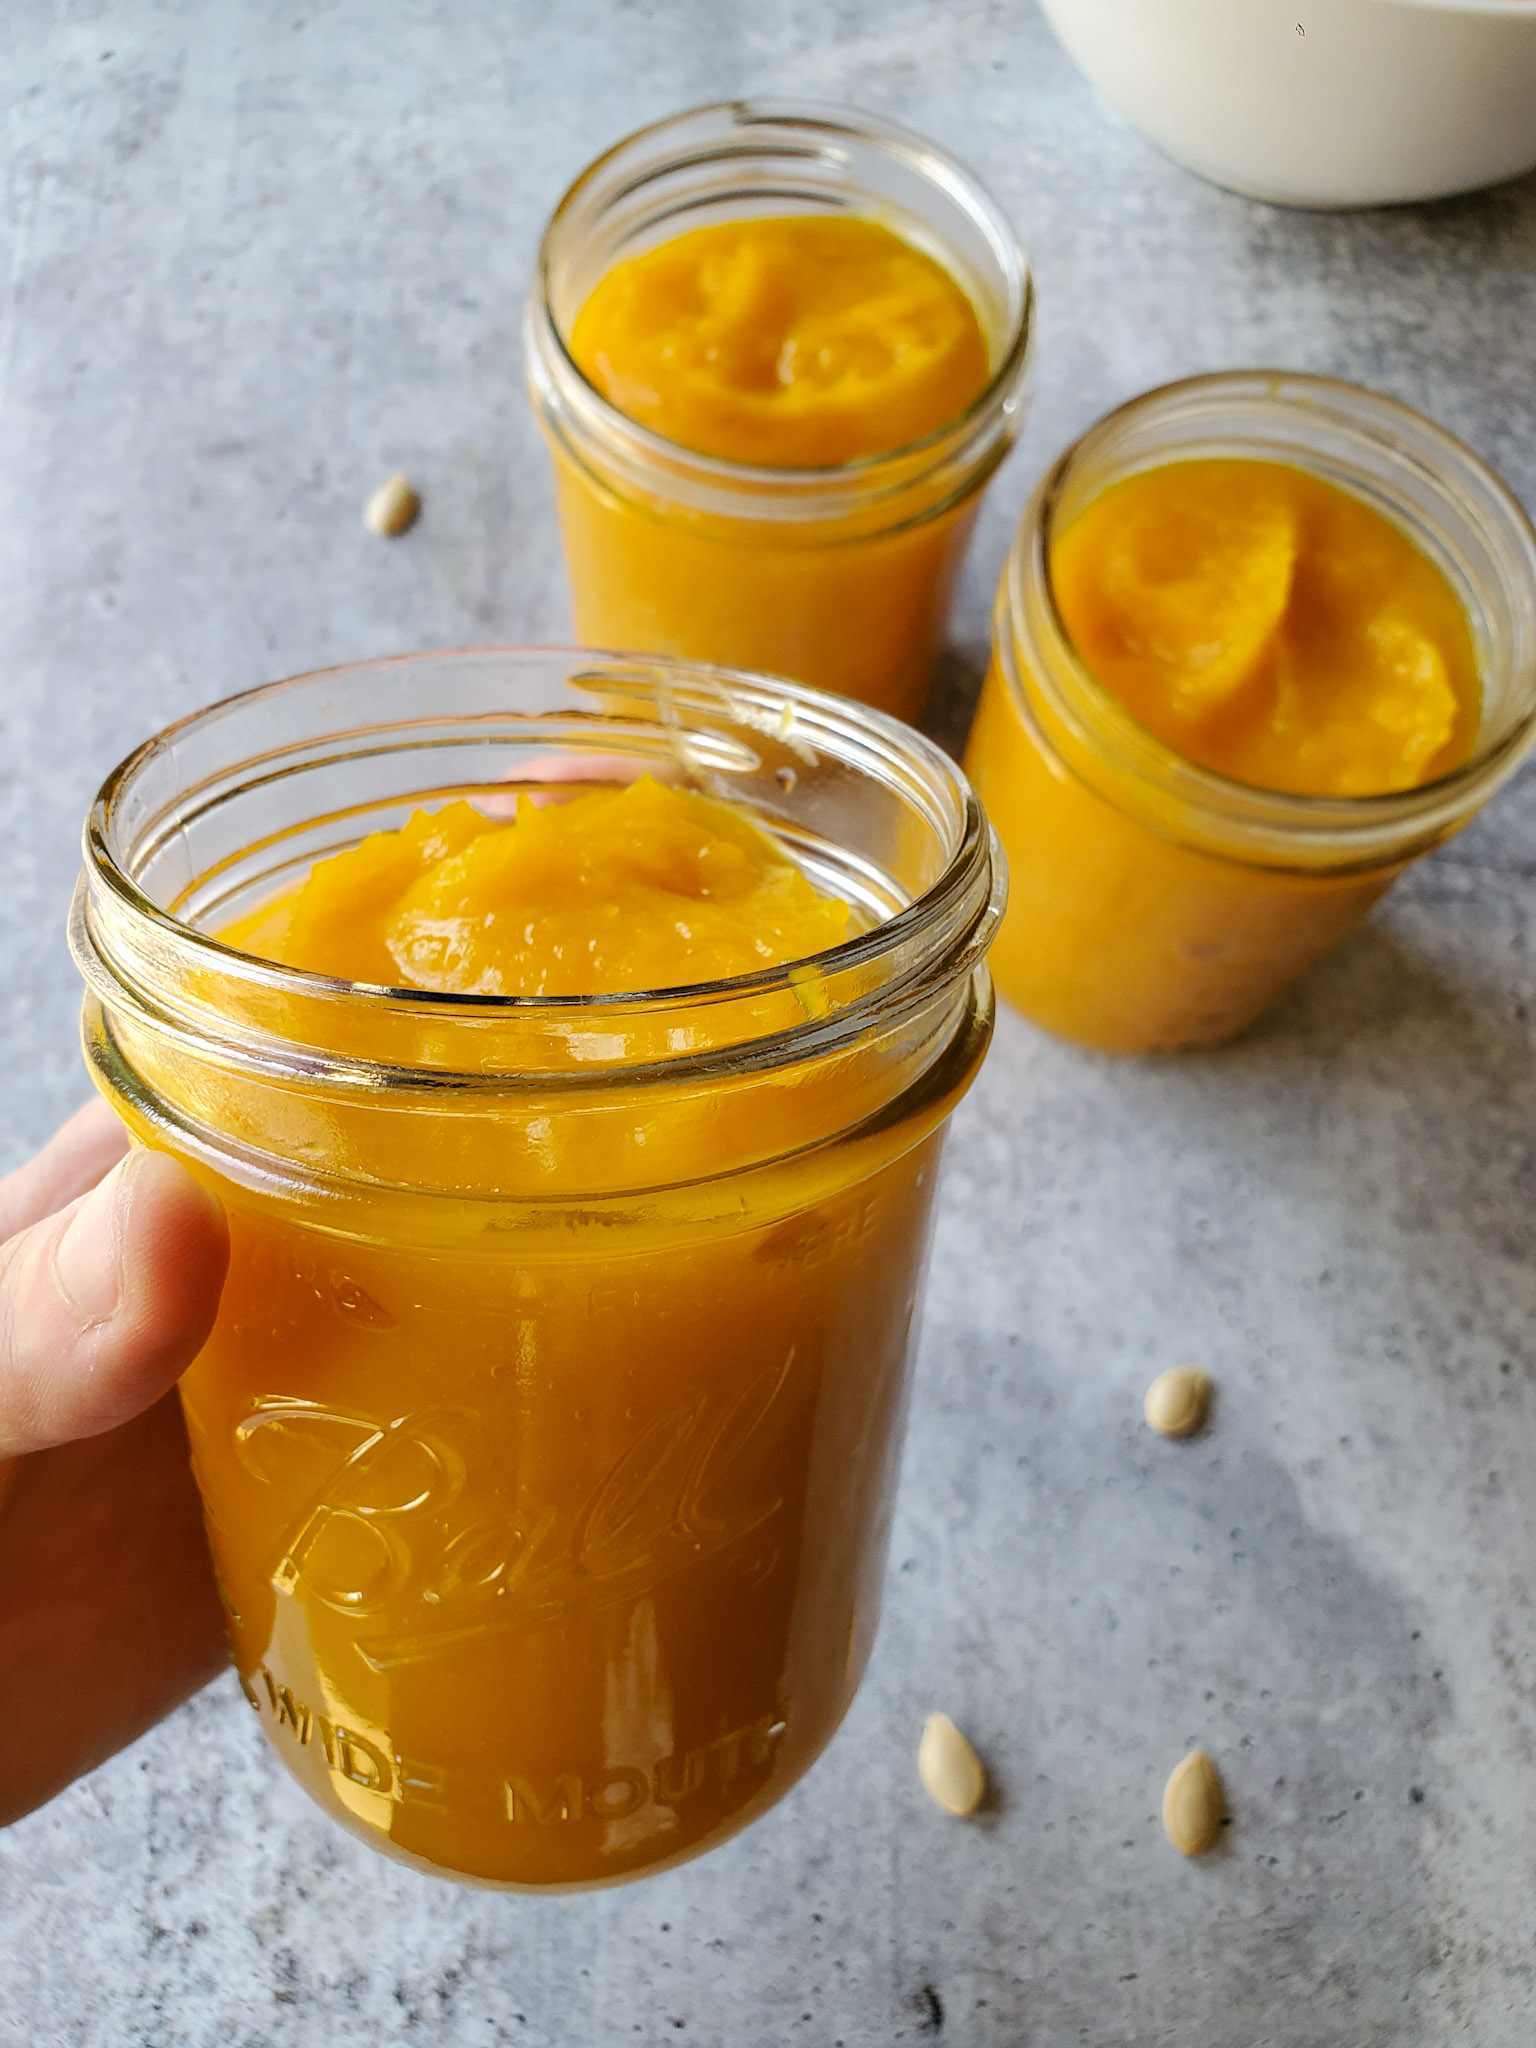 DeannaCat is holding a pint mason jar full of homemade pumpkin puree. It is vibrant orangish yellow in color, in the background there are two more pints of the pumpkin puree along with a few pumpkin seeds scattered about. 